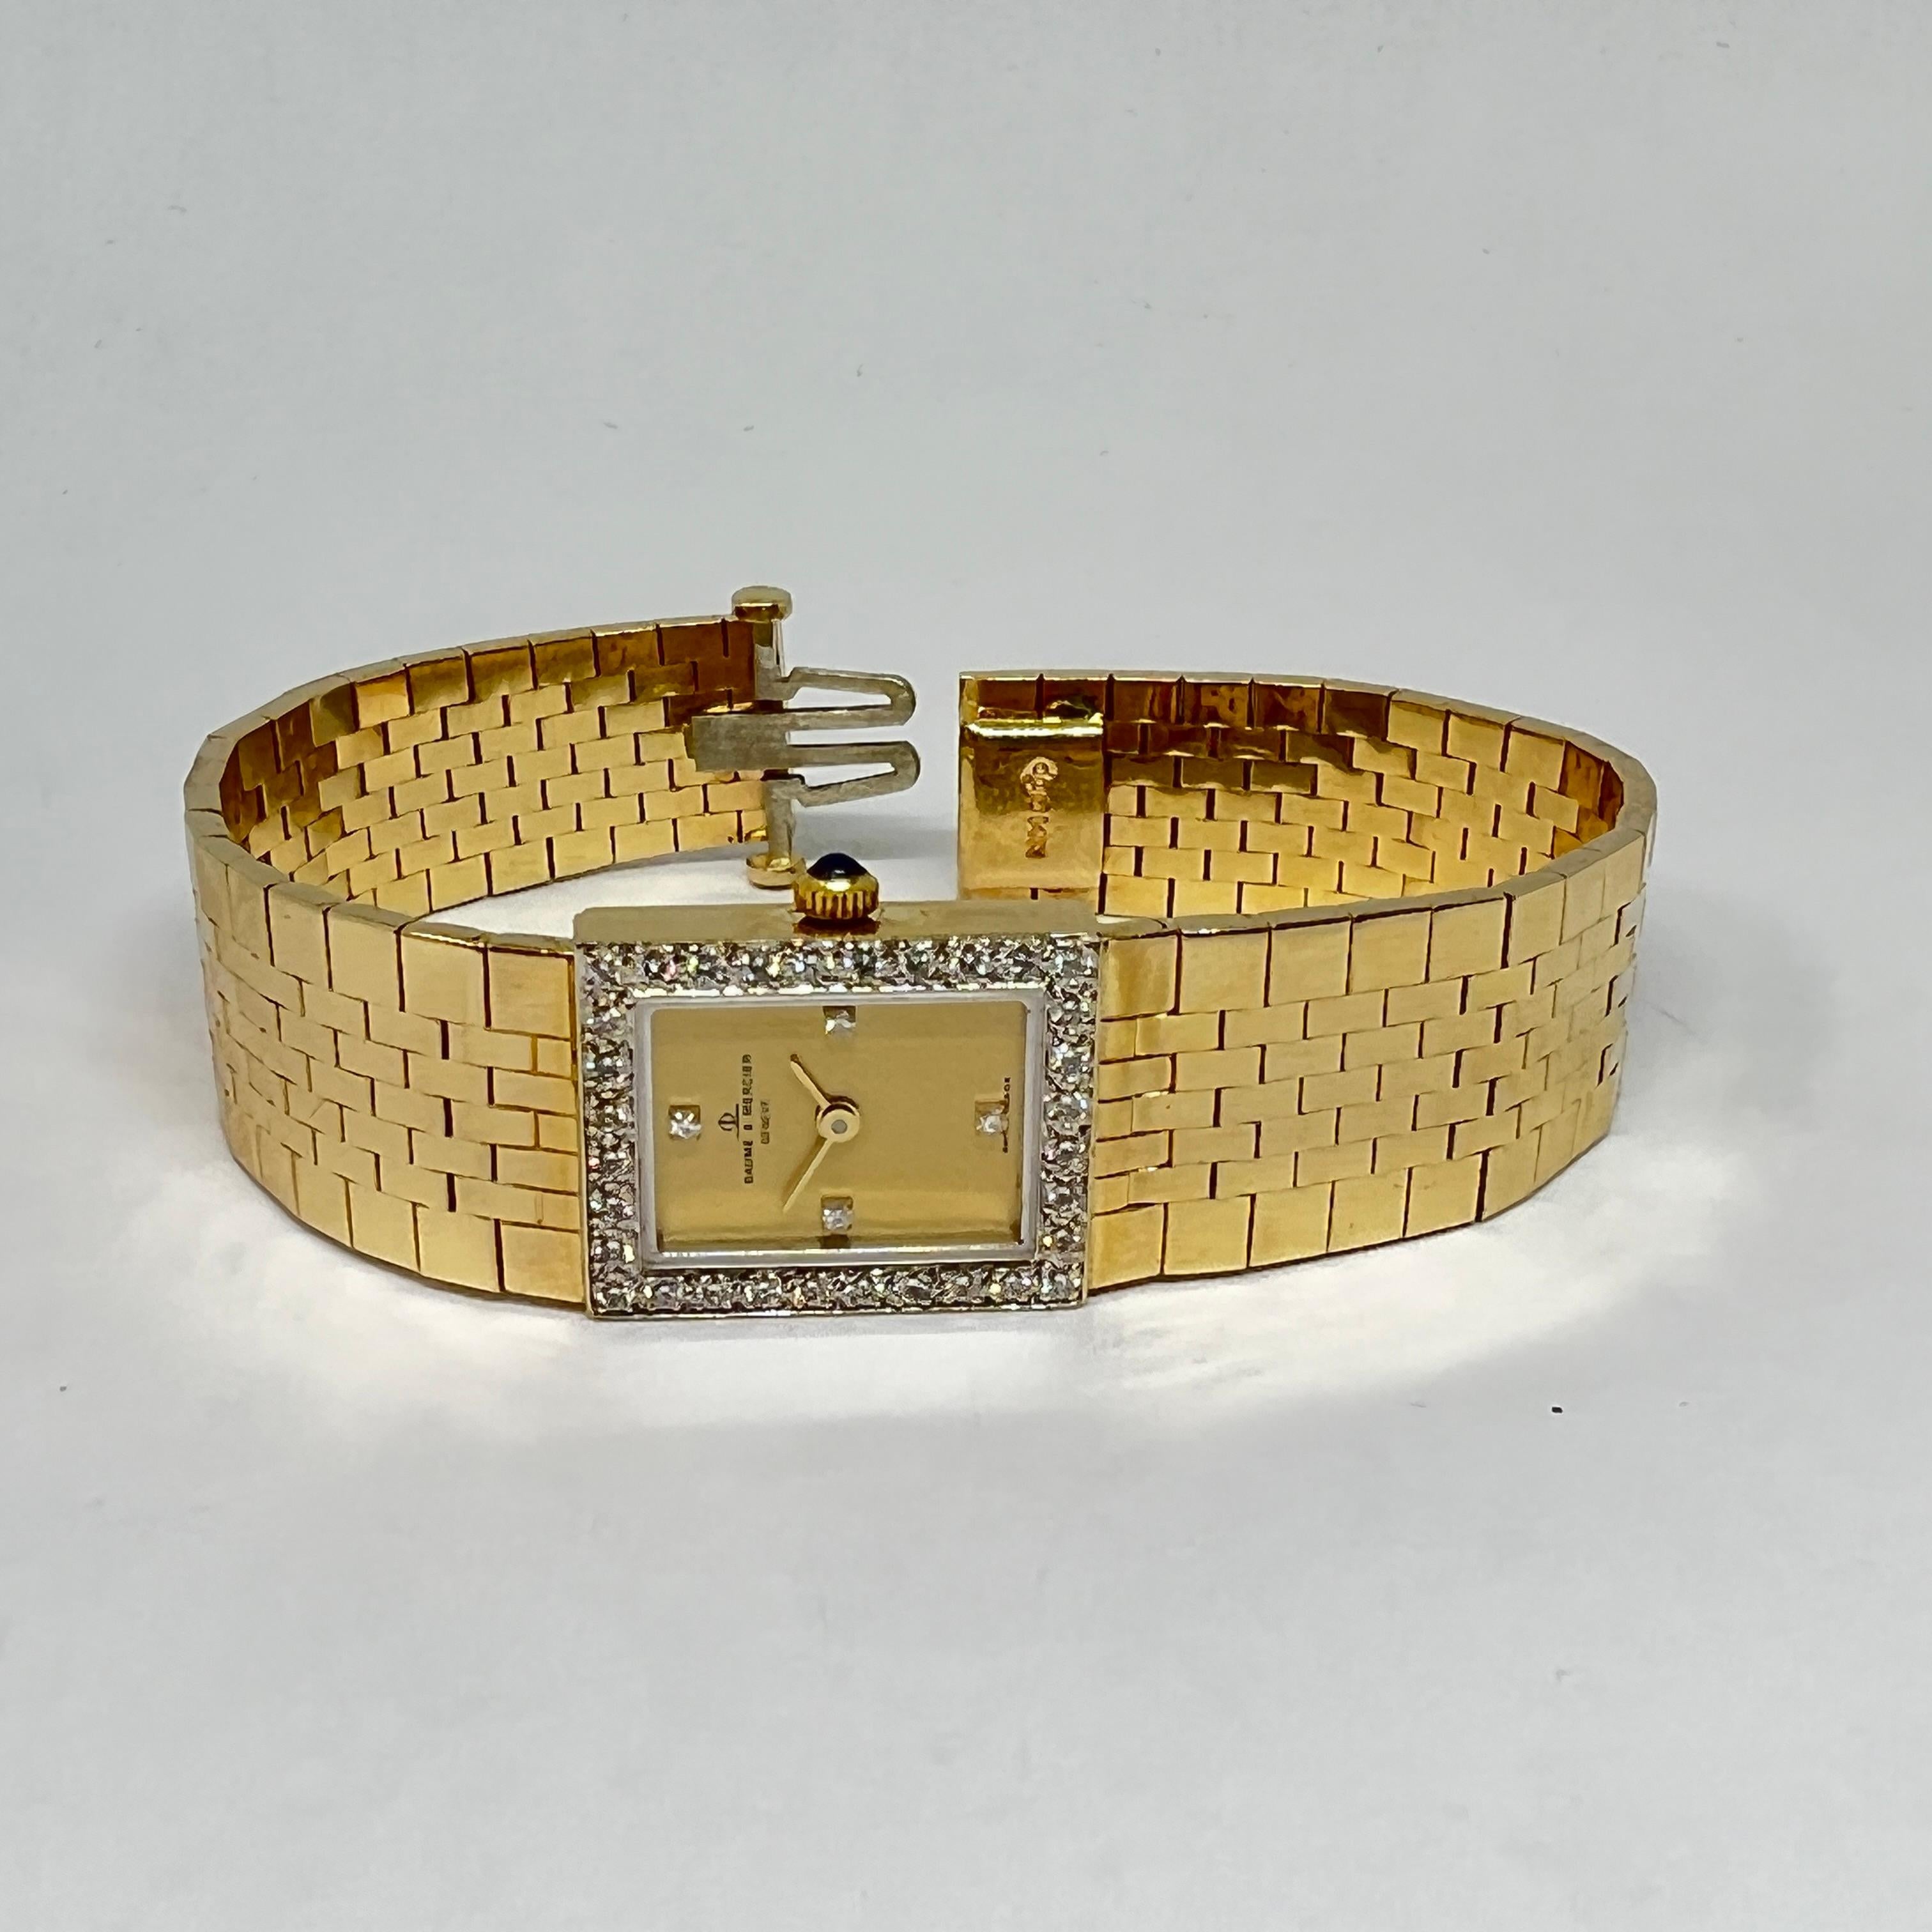 ​Pre-Owned Lady's Baume & Mercier Classic Vintage Diamond Mesh Watch. The watch is designed in 14 karat yellow gold, face measures 15x18mm with a pave diamond bezel and markers, gold tone matt finish face, mesh bracelet, measures 6.25